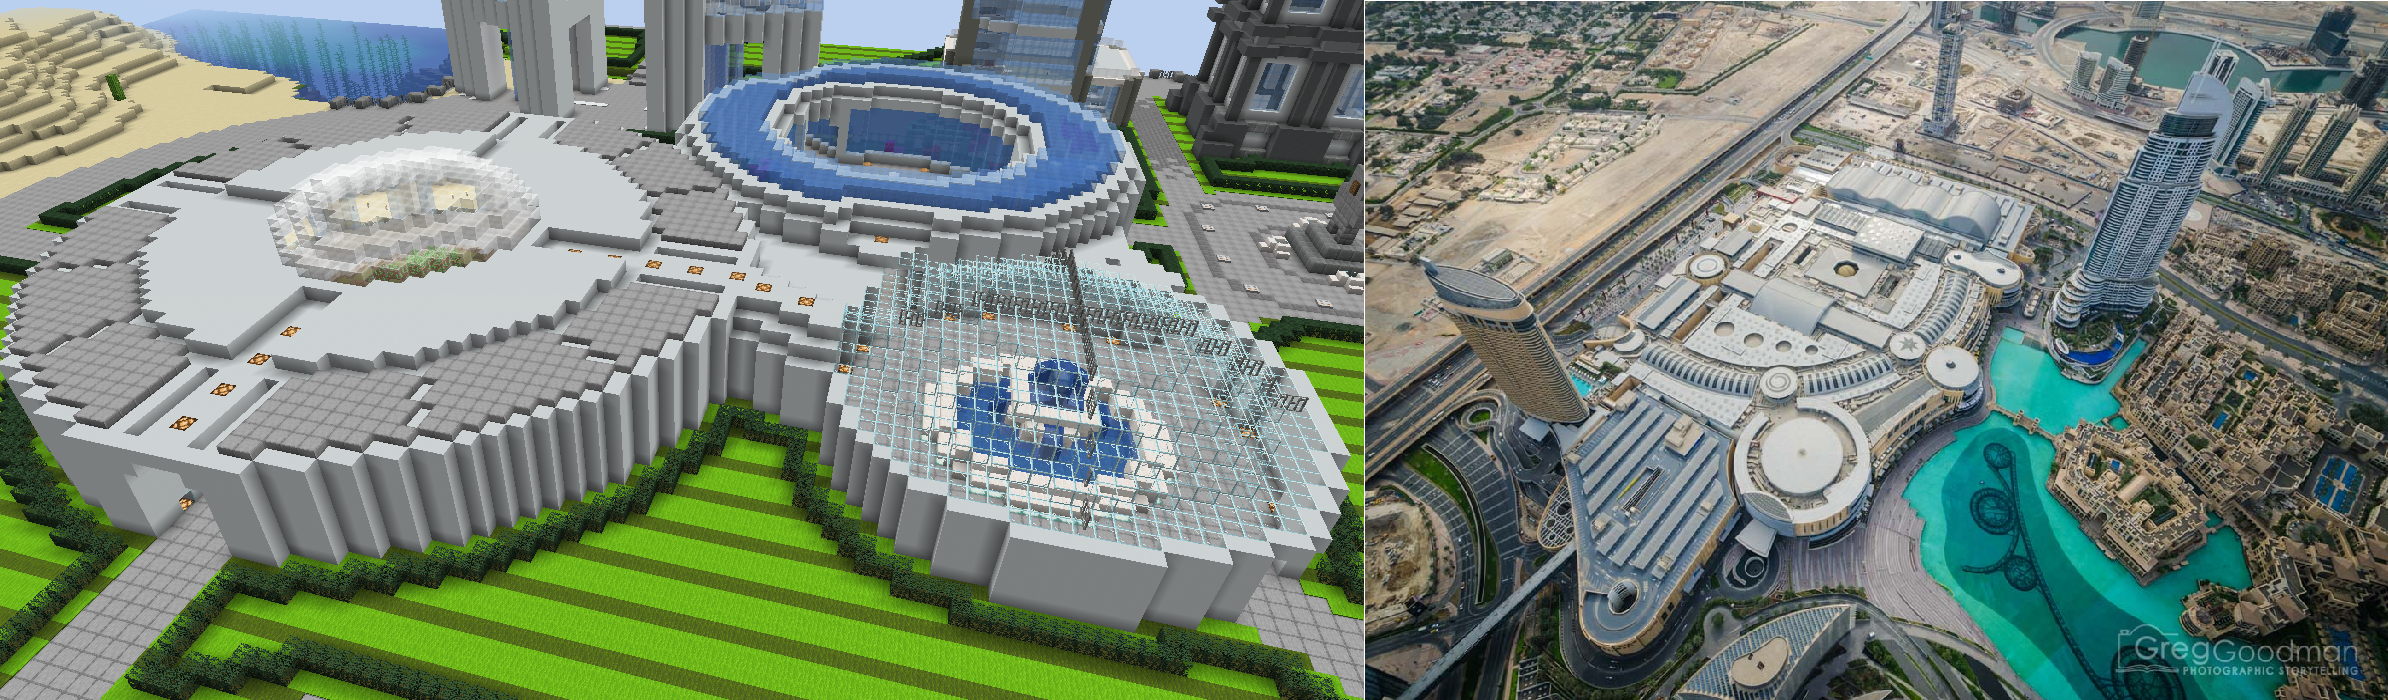 The Dubai Mall in-game vs. real-life